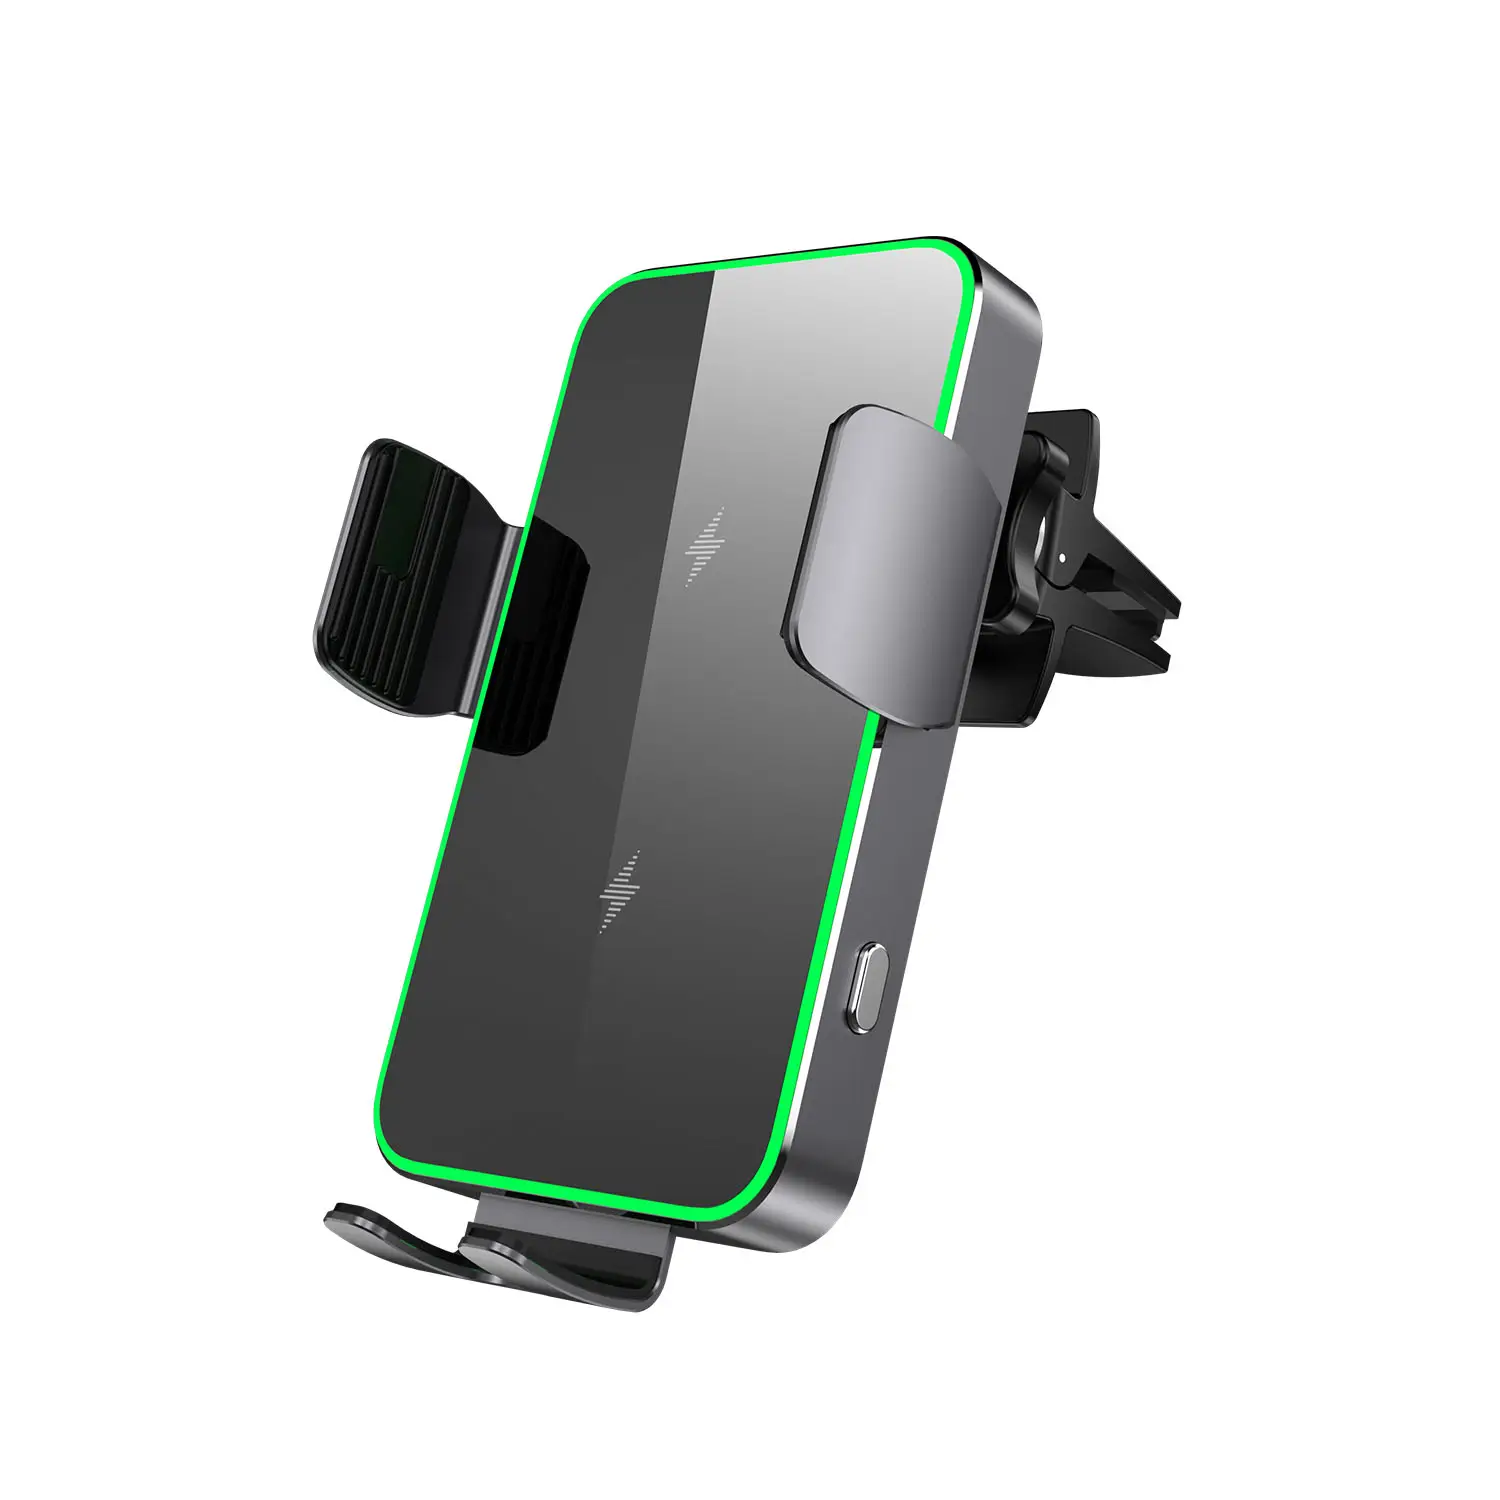 Aluminum alloy double coil car charging, wireless car charger, aluminum alloy charger with green and blue atmosphere lights